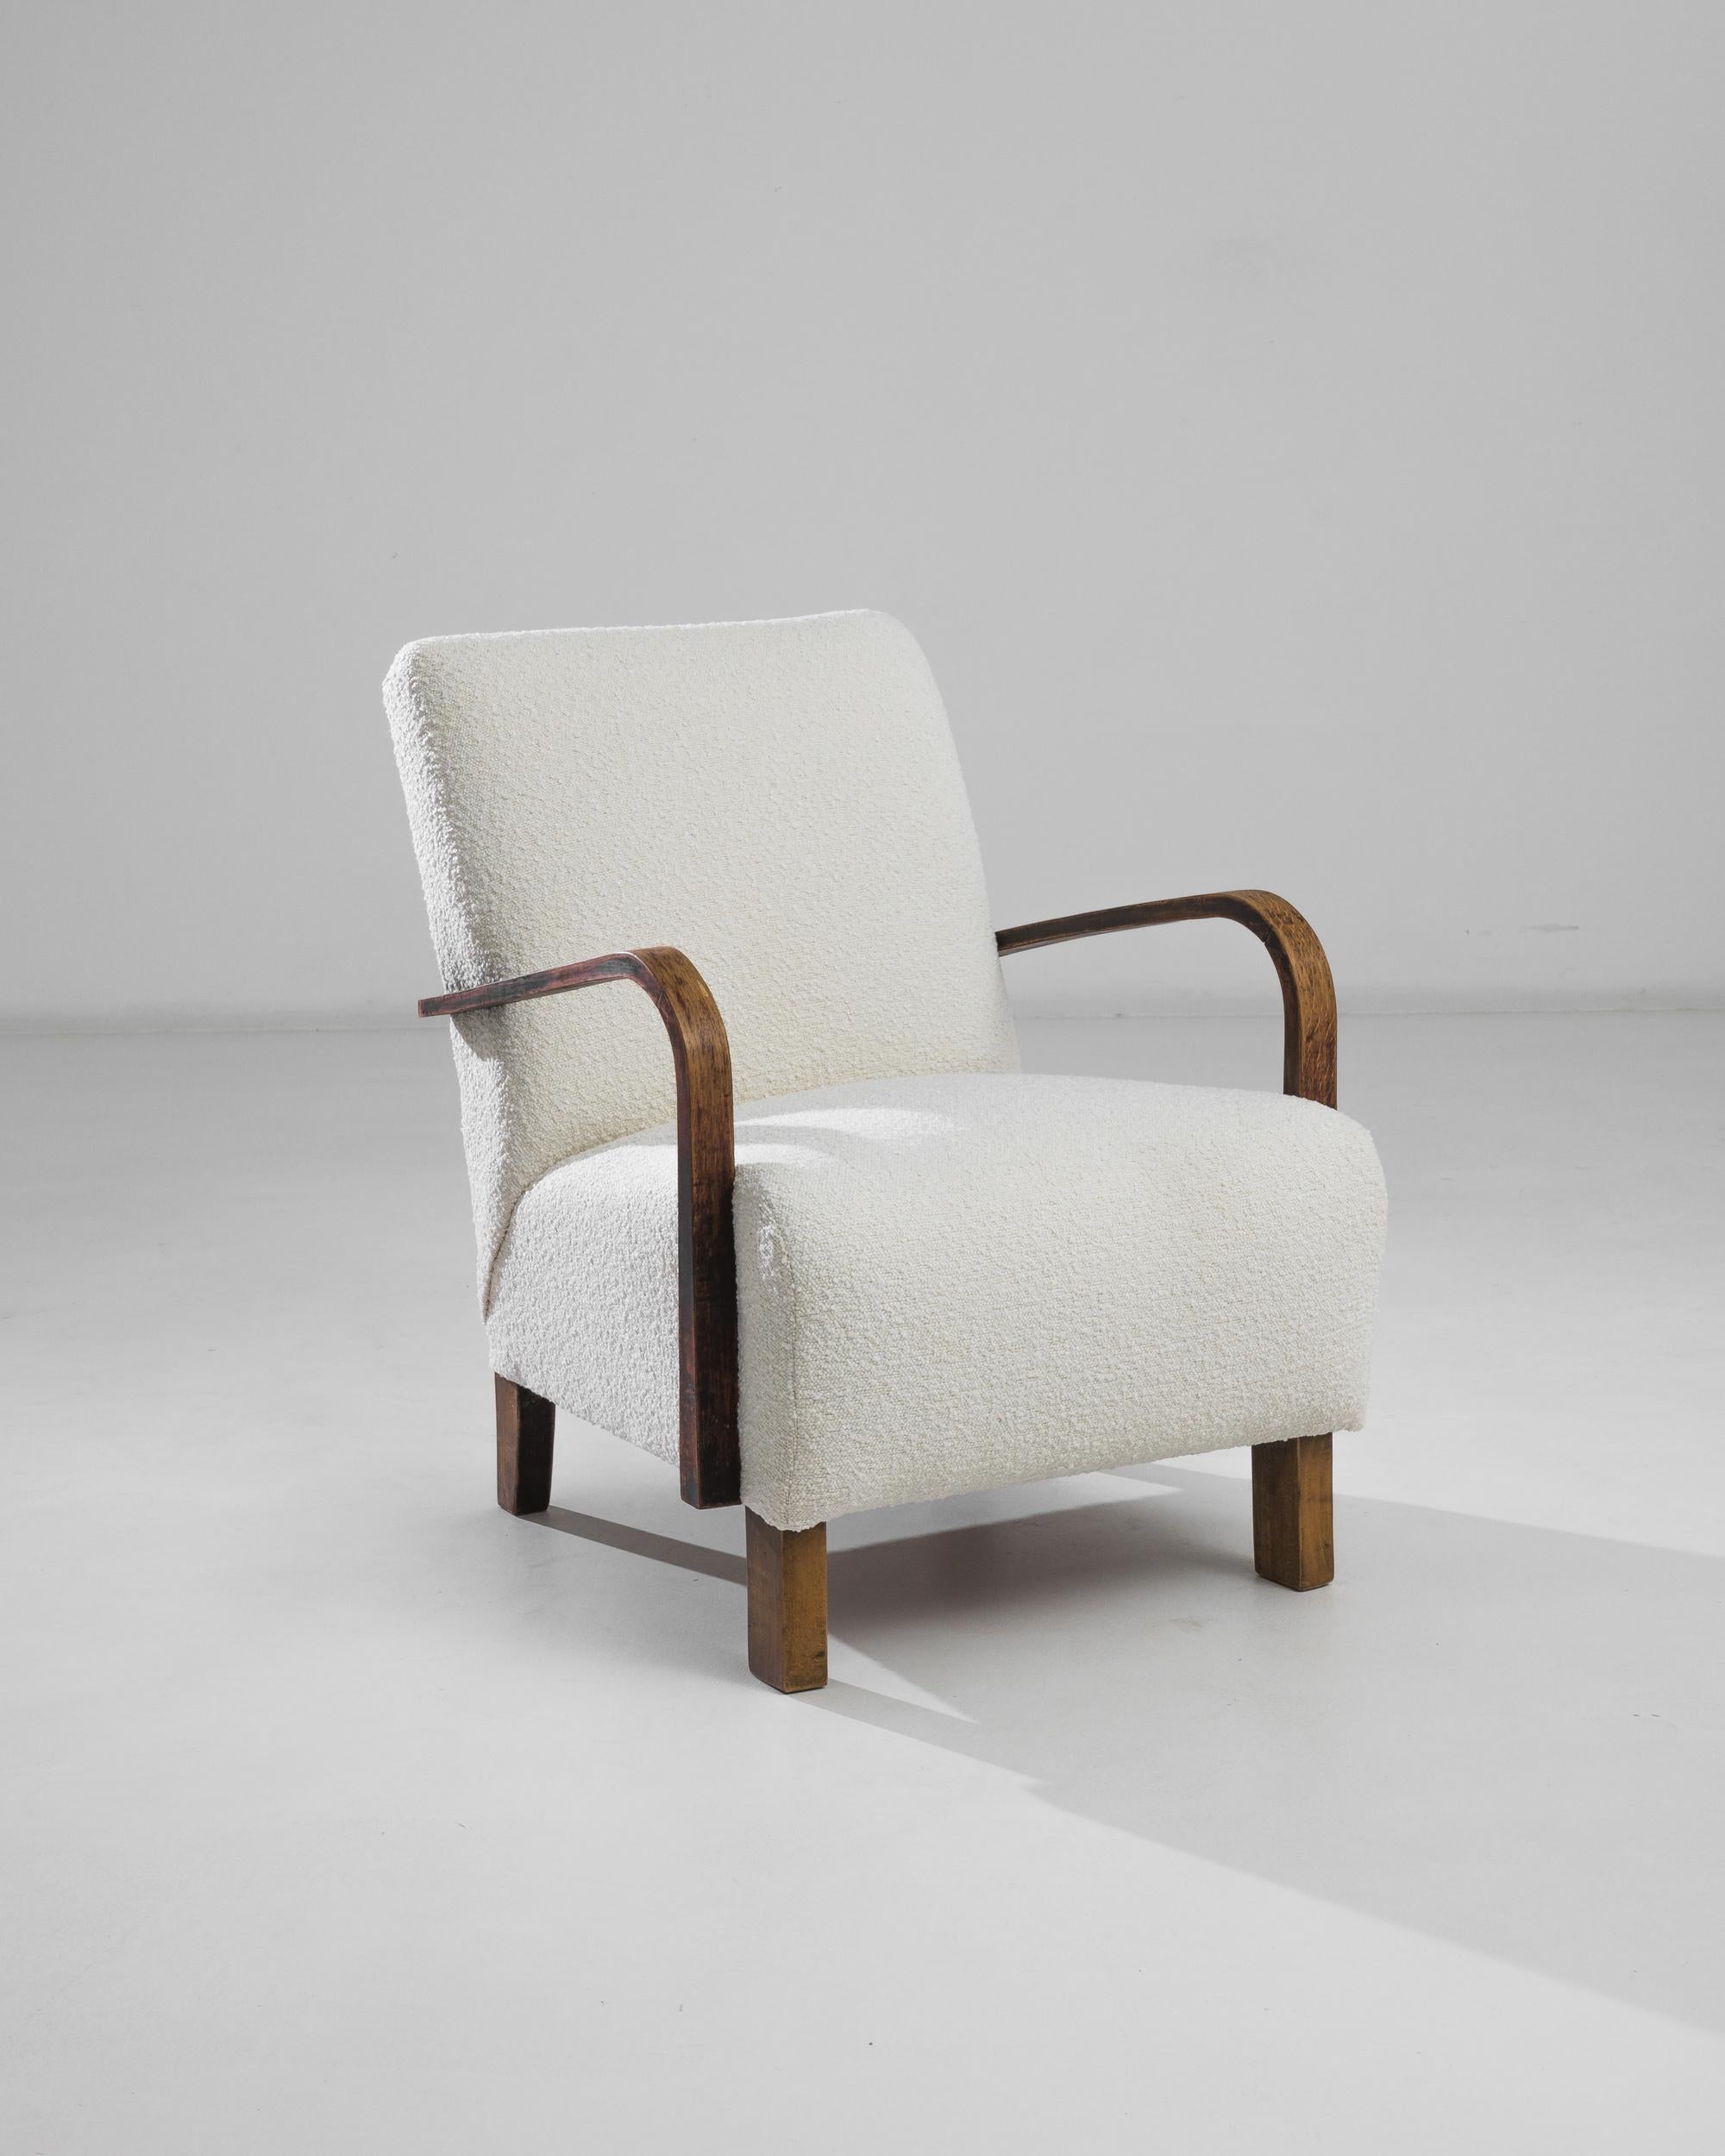 Produced in the former Czechoslovakia, this 1960s design is reupholstered in an airy white bouclé, chosen to compliment the elegant polish of the hardwood frame. Comfortable angles and clean lines are designed to comfort and delight, presented